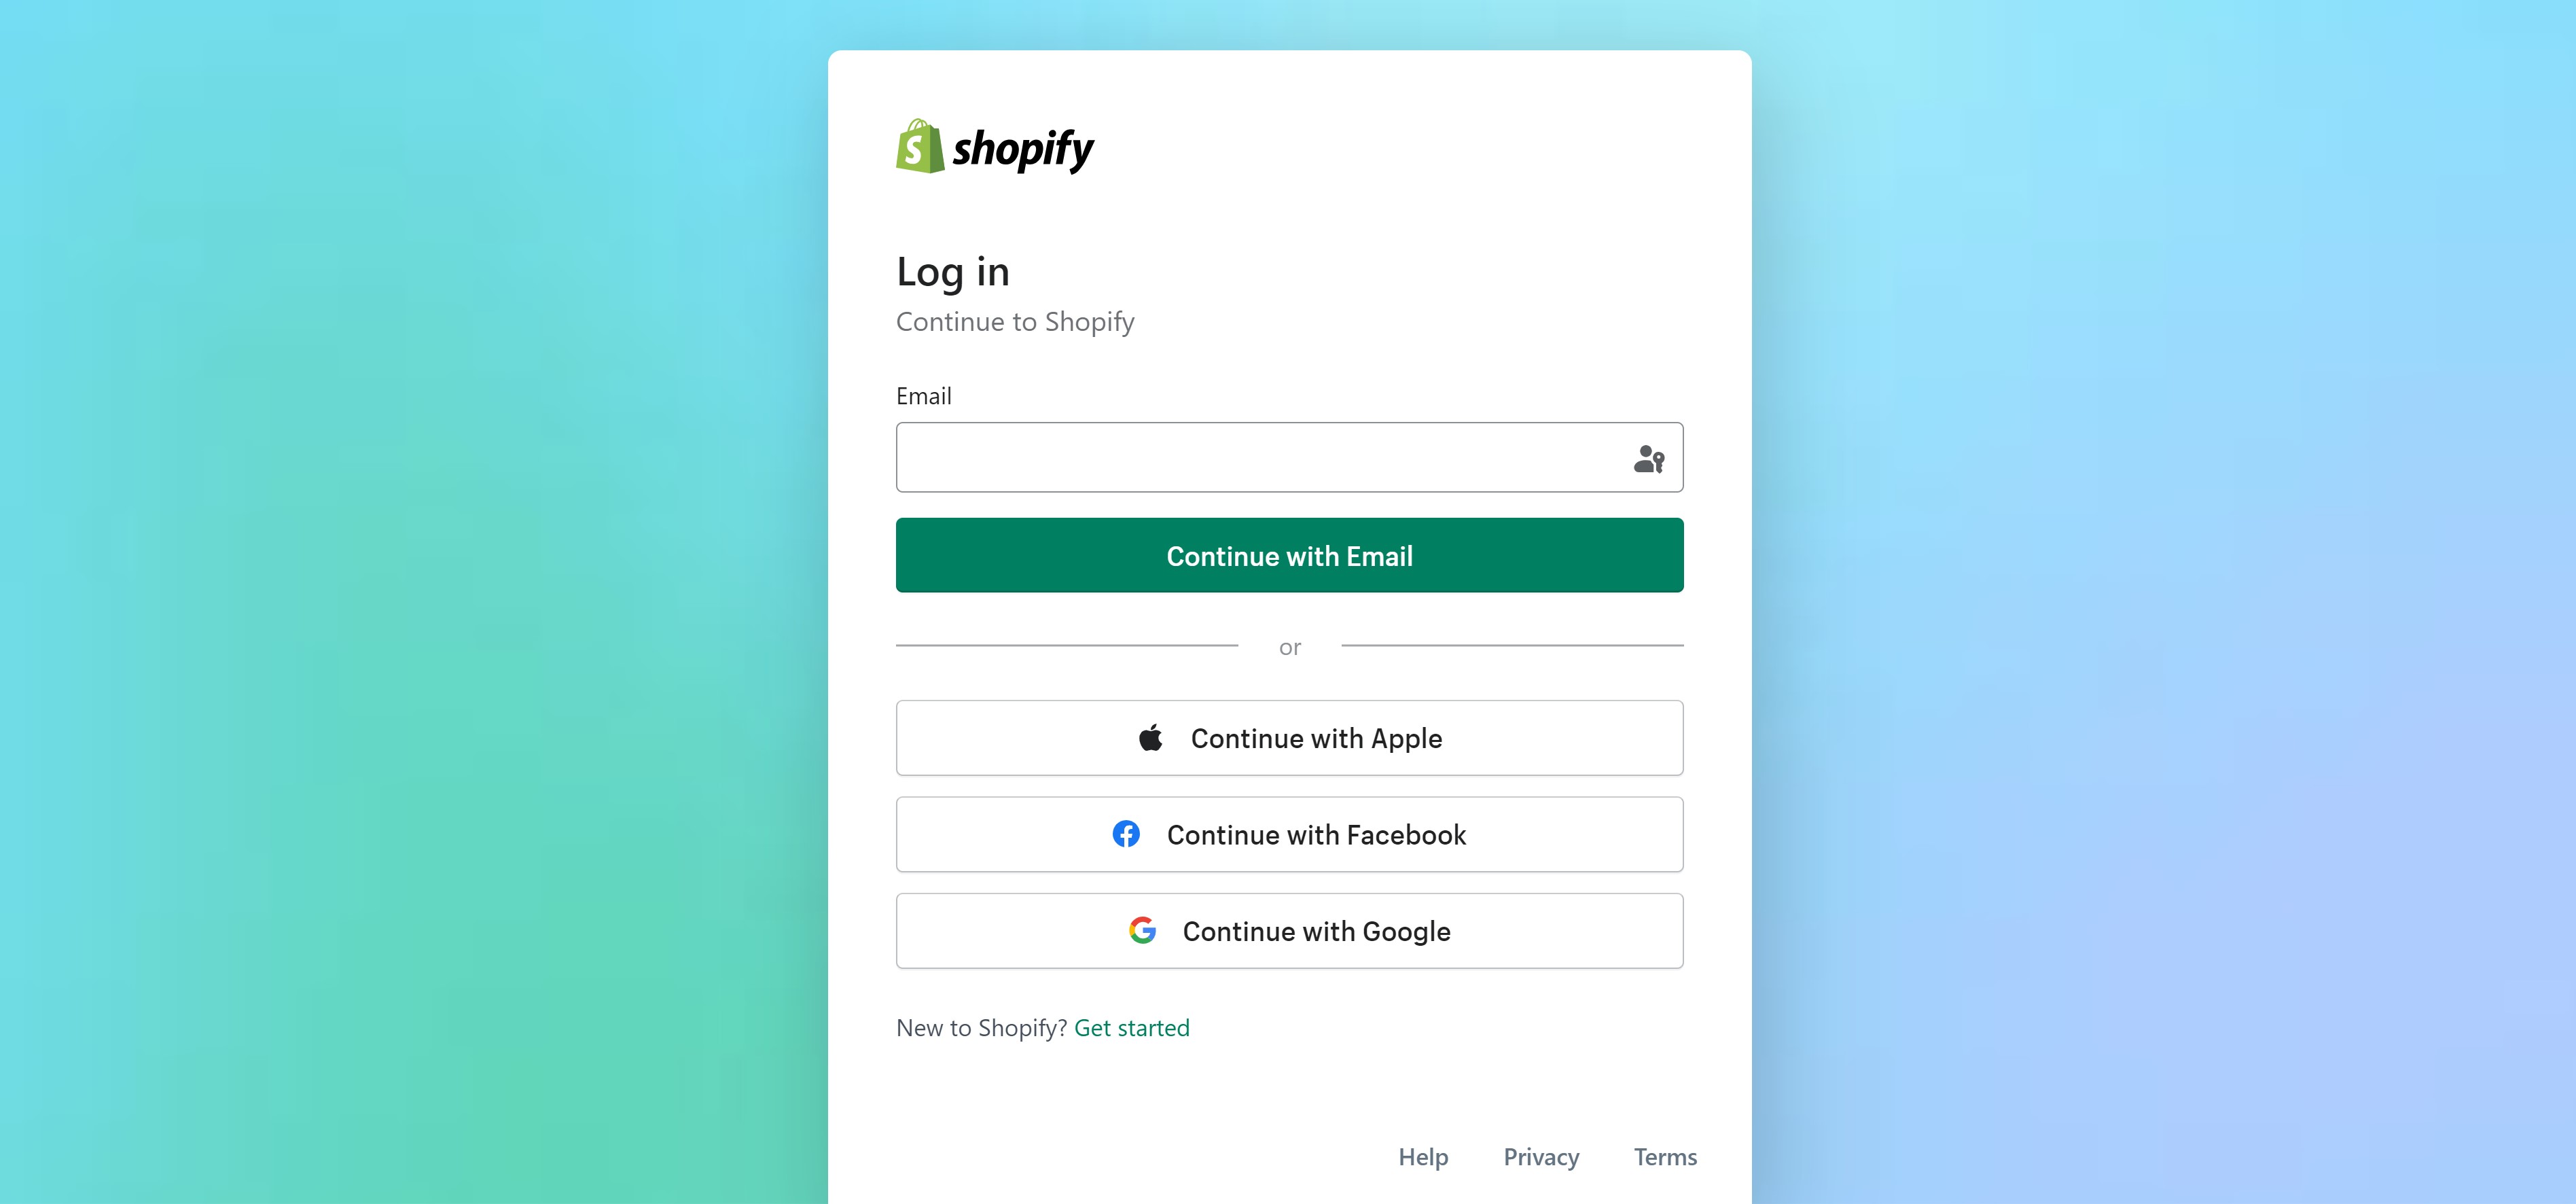 The log in screen of Shopify